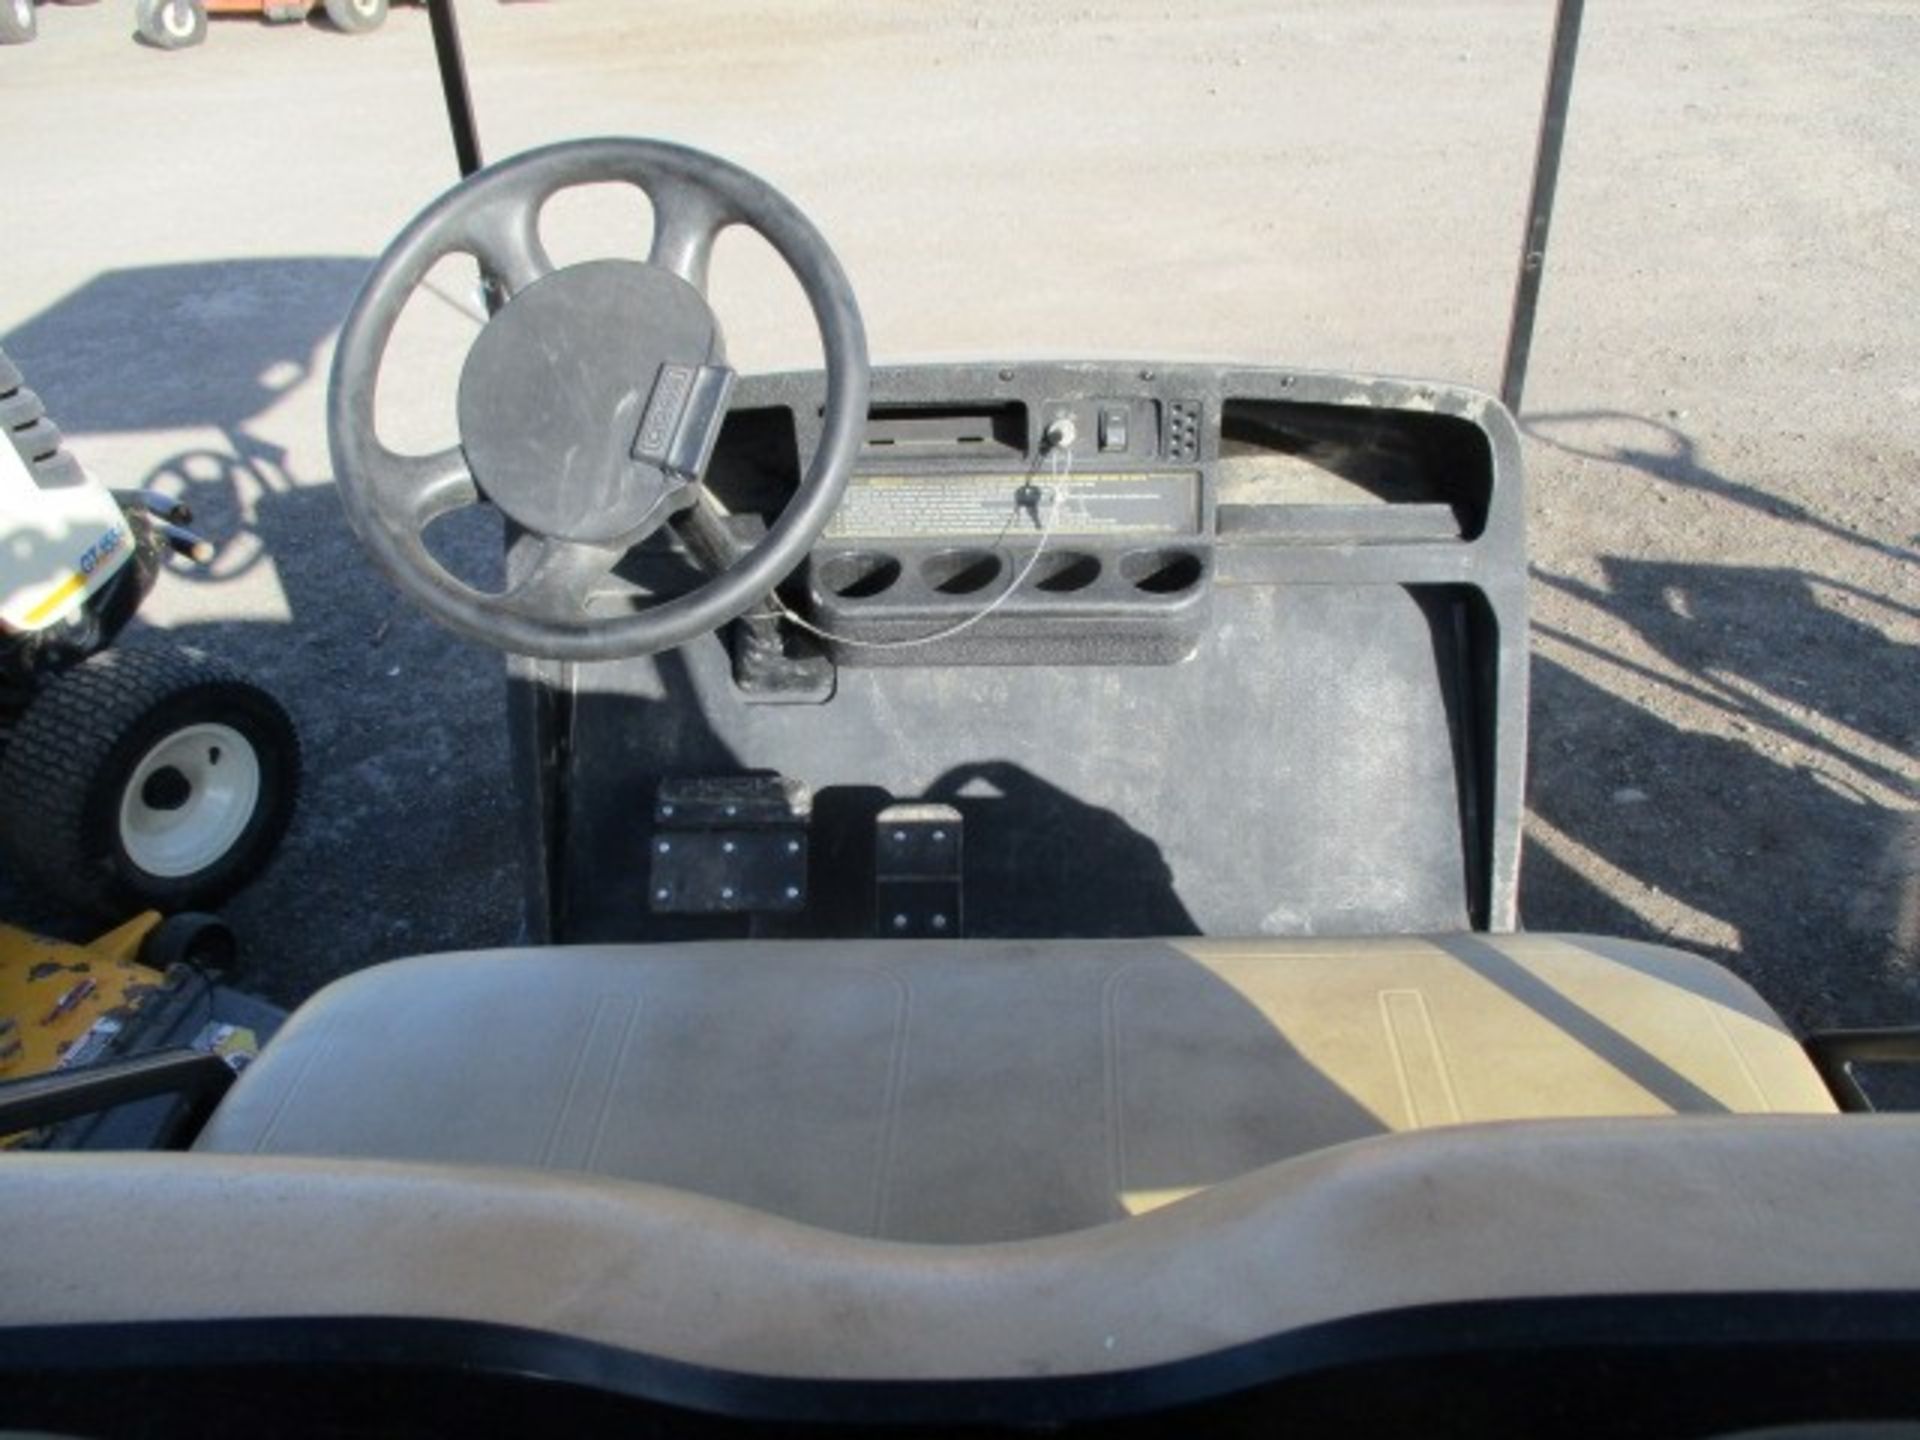 EZ-GO GOLF CART W/ MAG WHEELS AND CHARGER - Image 3 of 4